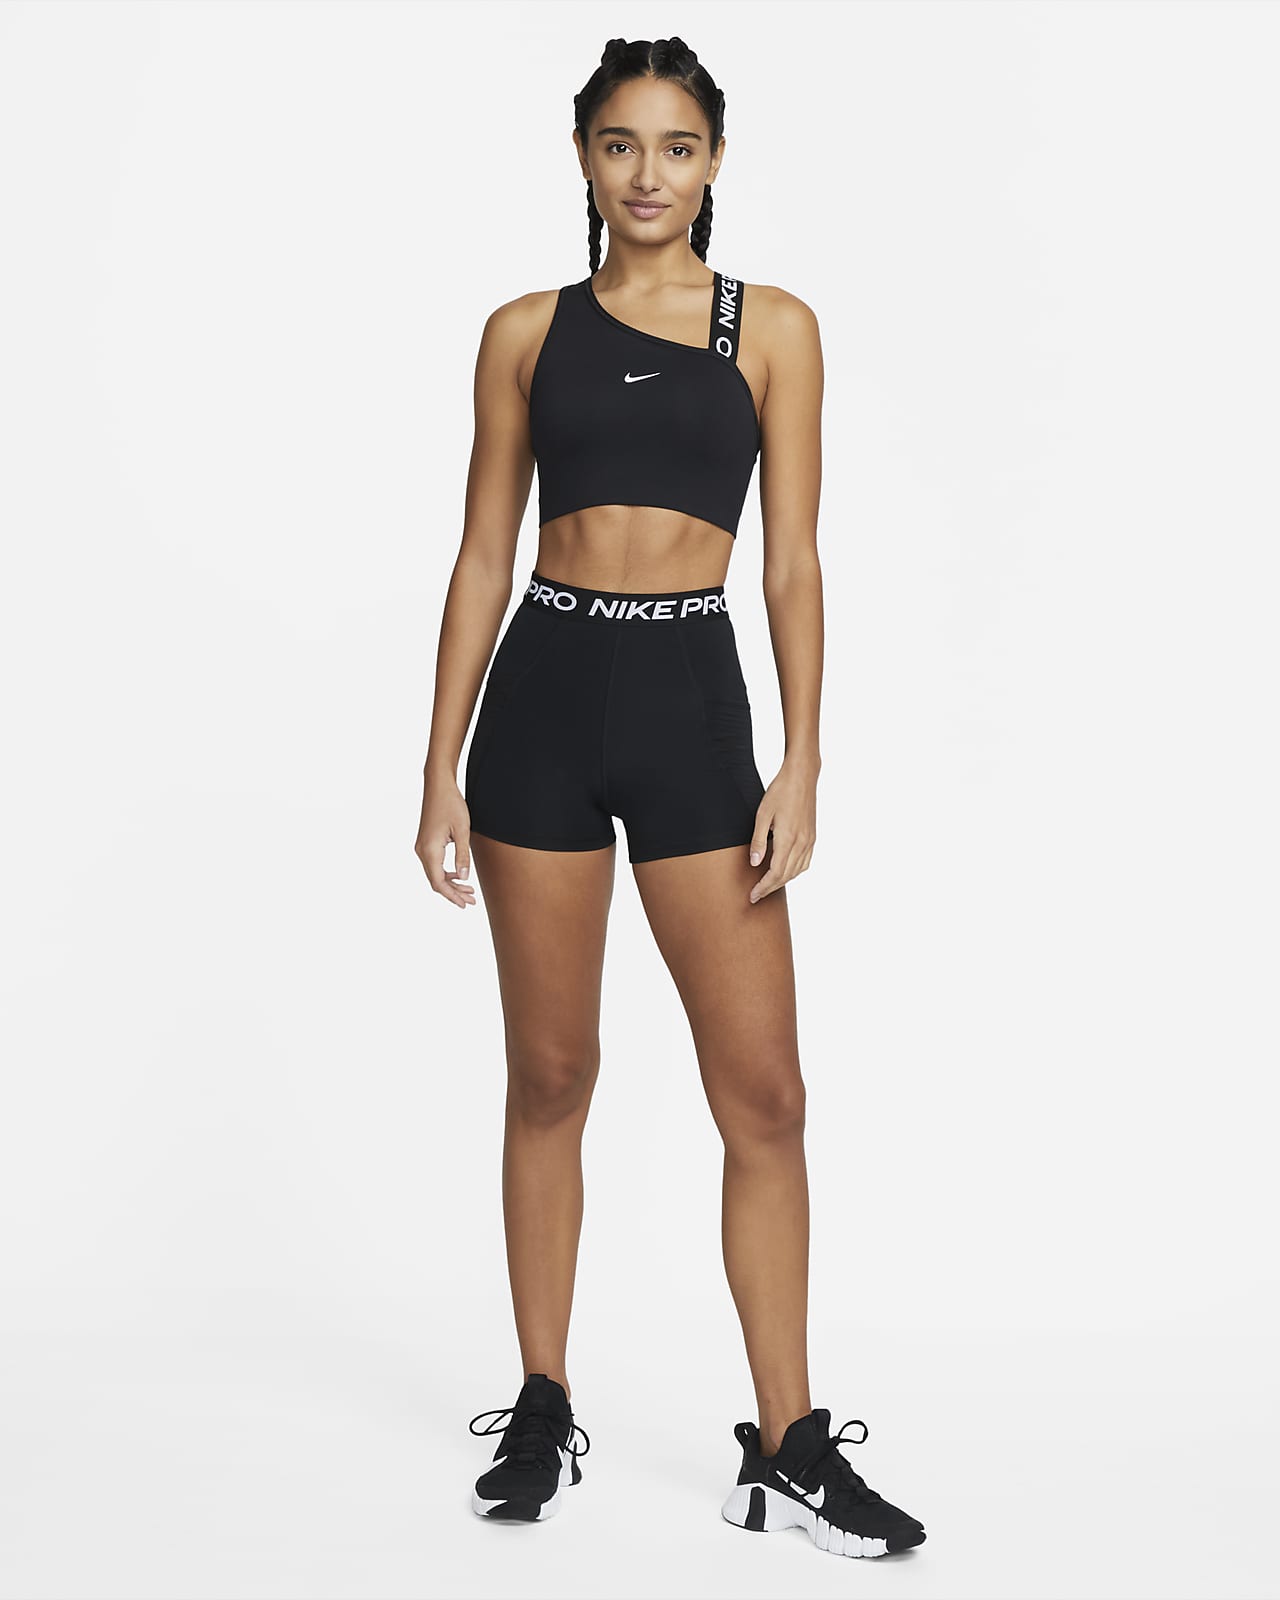 Perfervid End Dwelling Nike Pro Women's 3" High-Waisted Training Shorts with Pockets. Nike.com